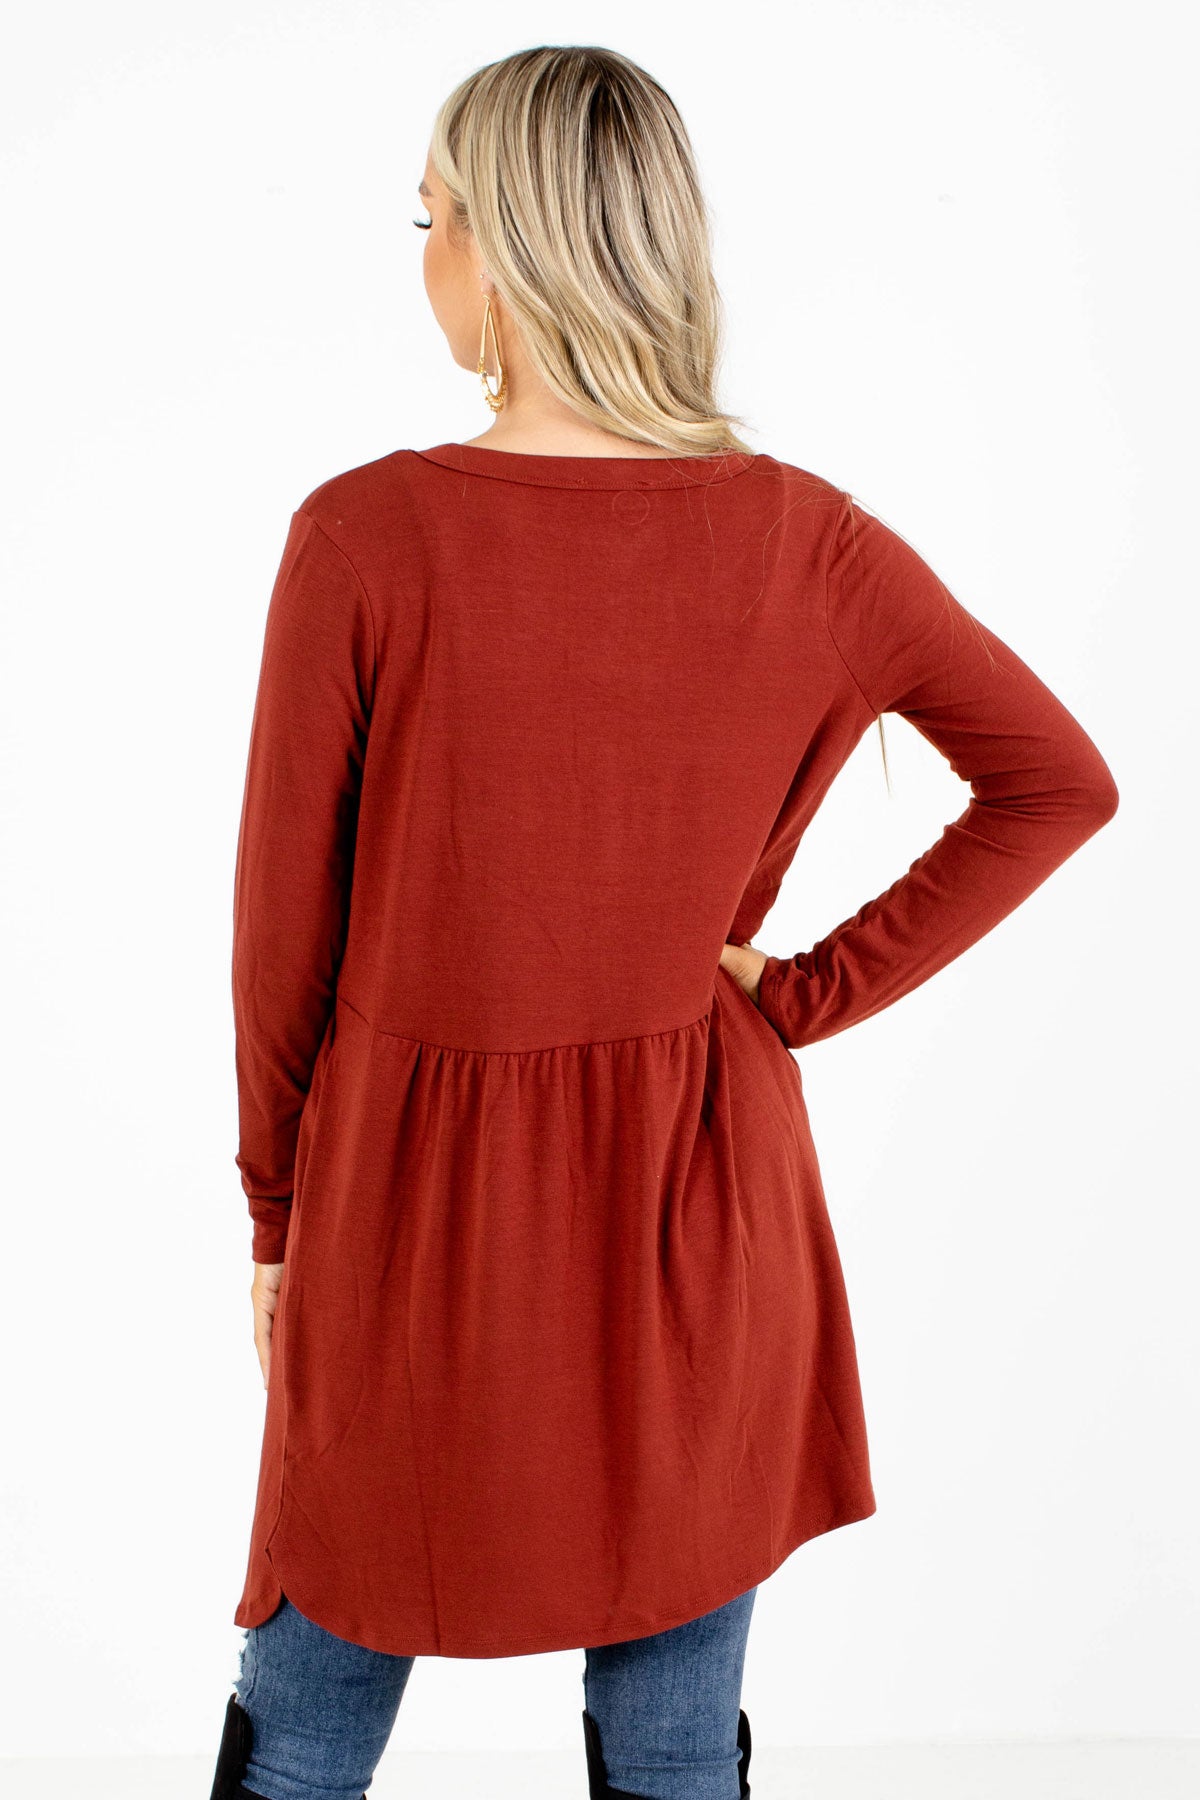 Long Cardigan in Rust Red for Women